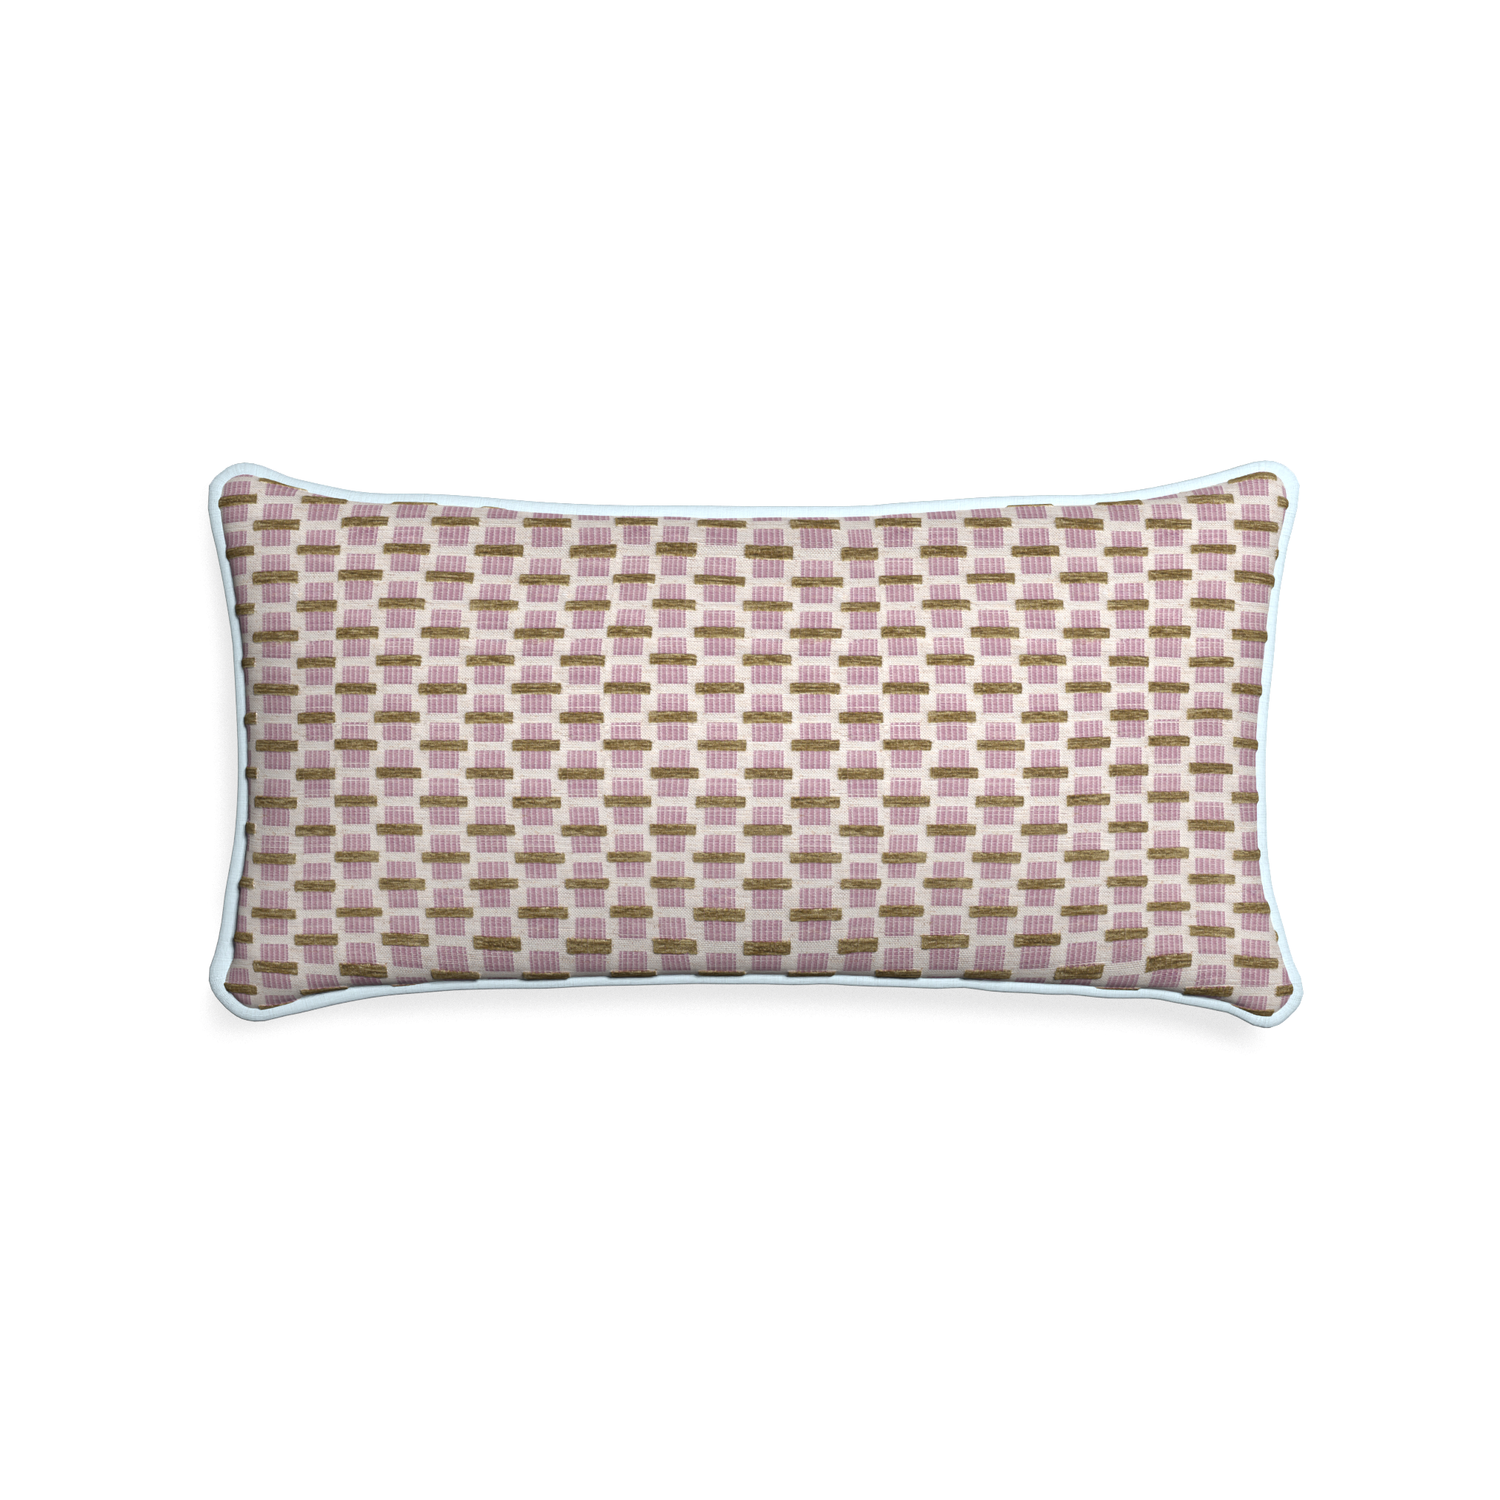 Midi-lumbar willow orchid custom pink geometric chenillepillow with powder piping on white background